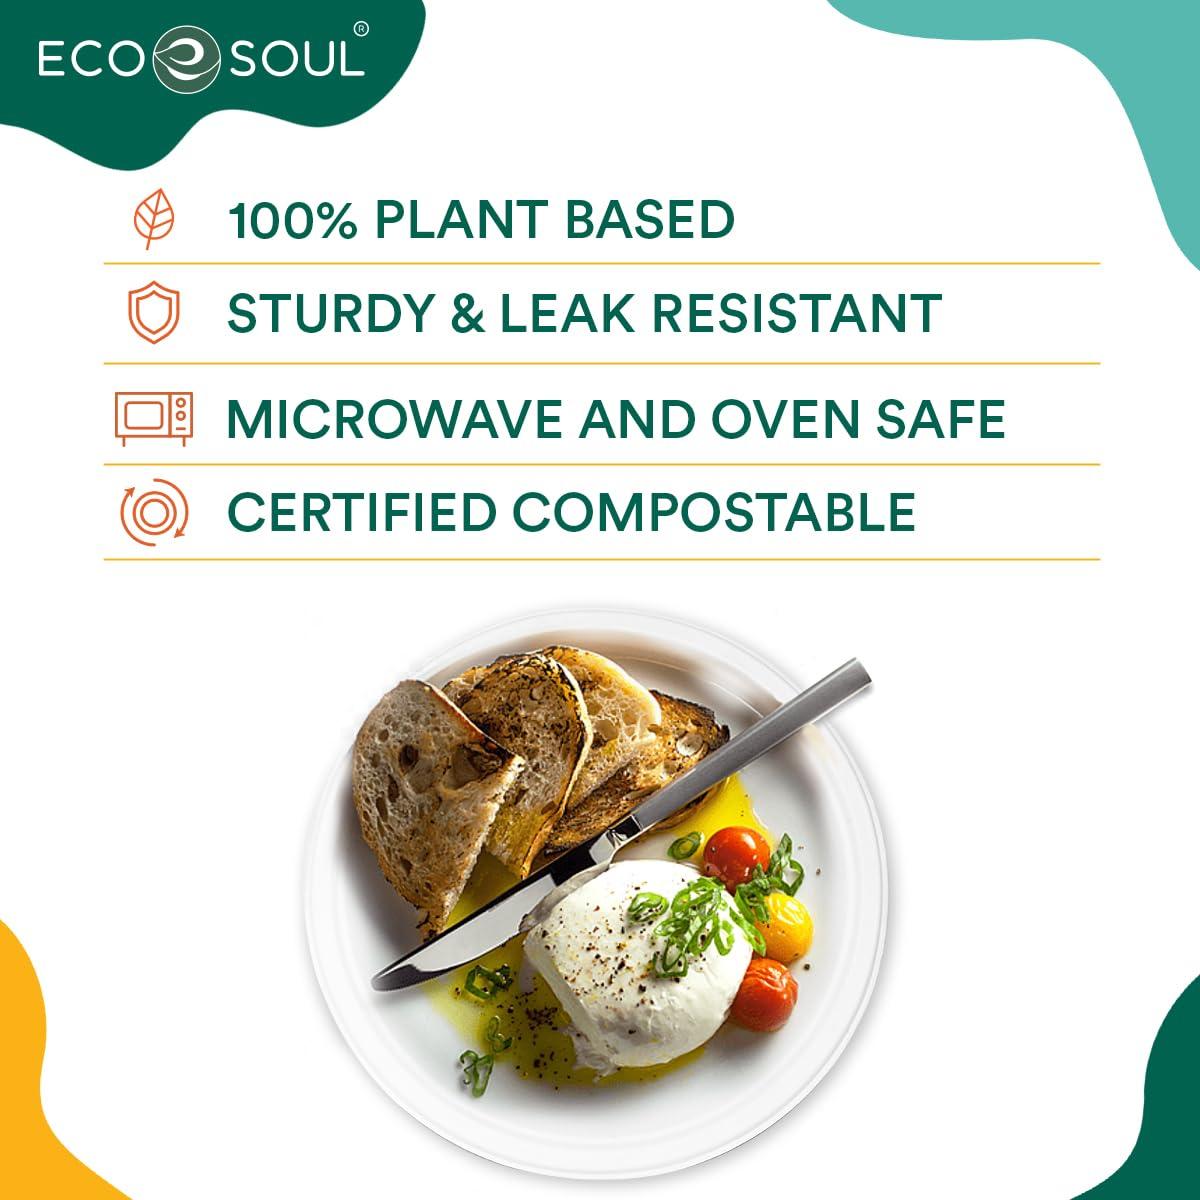 ECO SOUL Pearl White Round 15cm(6") Bagasse Plates, 10x Times Sturdy Than Paper Plates(Pack of 100), Disposable Tableware, 100% Compostable, Eco Friendly Alternative to Plastic Plates, Microwavable 3